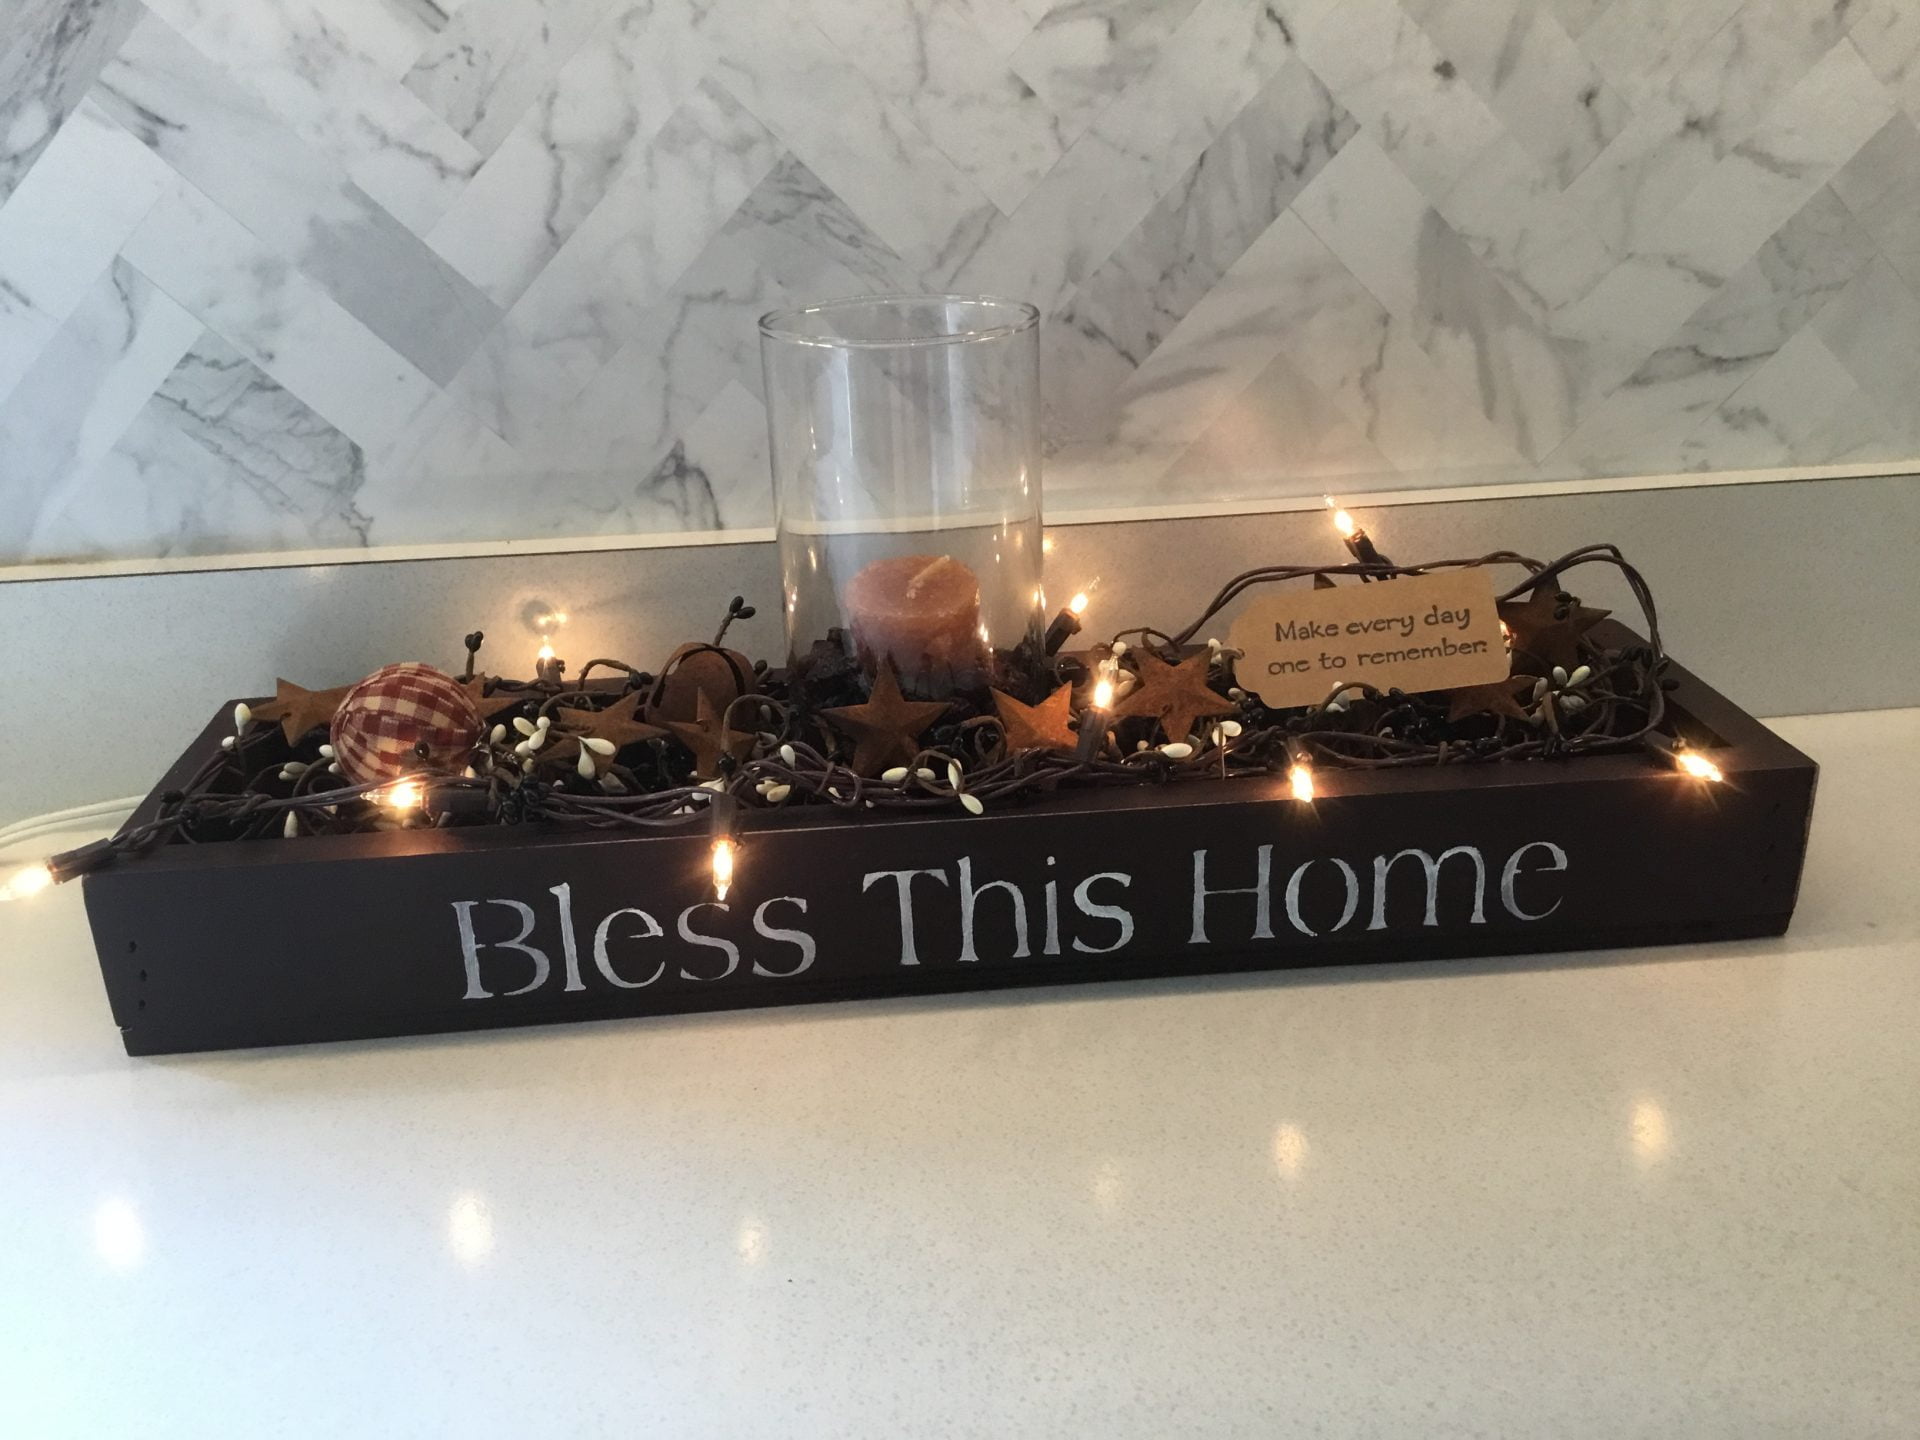 Bless This Home Candle Box with Lights